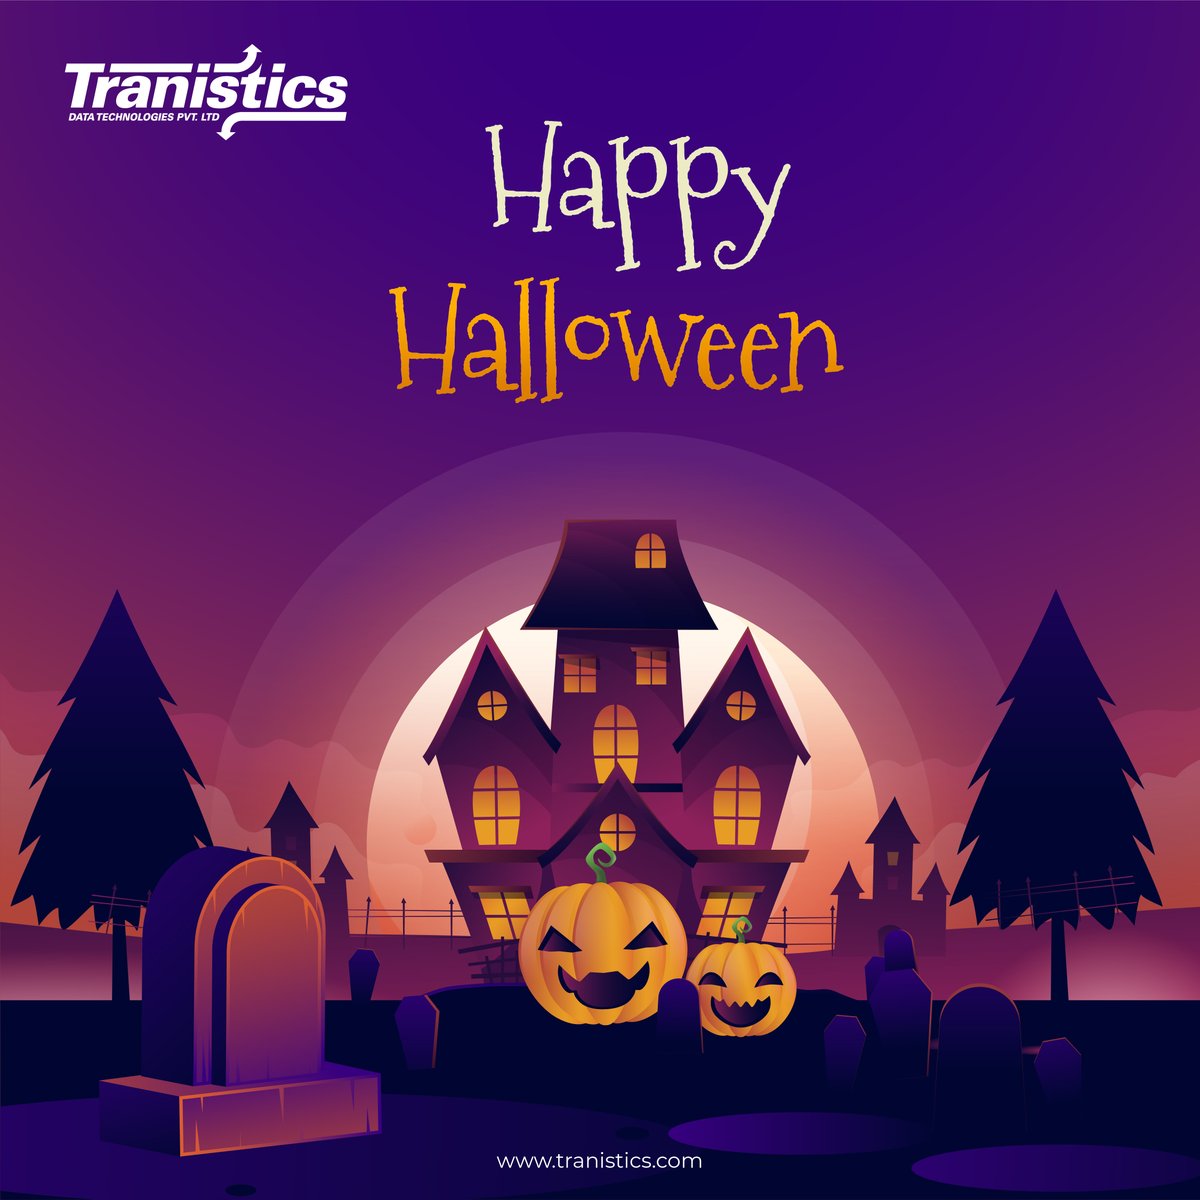 It's that spooky time of year!  Stay safe this Halloween and have fun with friends, family and your community!  #Tranistics #trustedbusinesspartner #halloween2023 #logistics #publishing